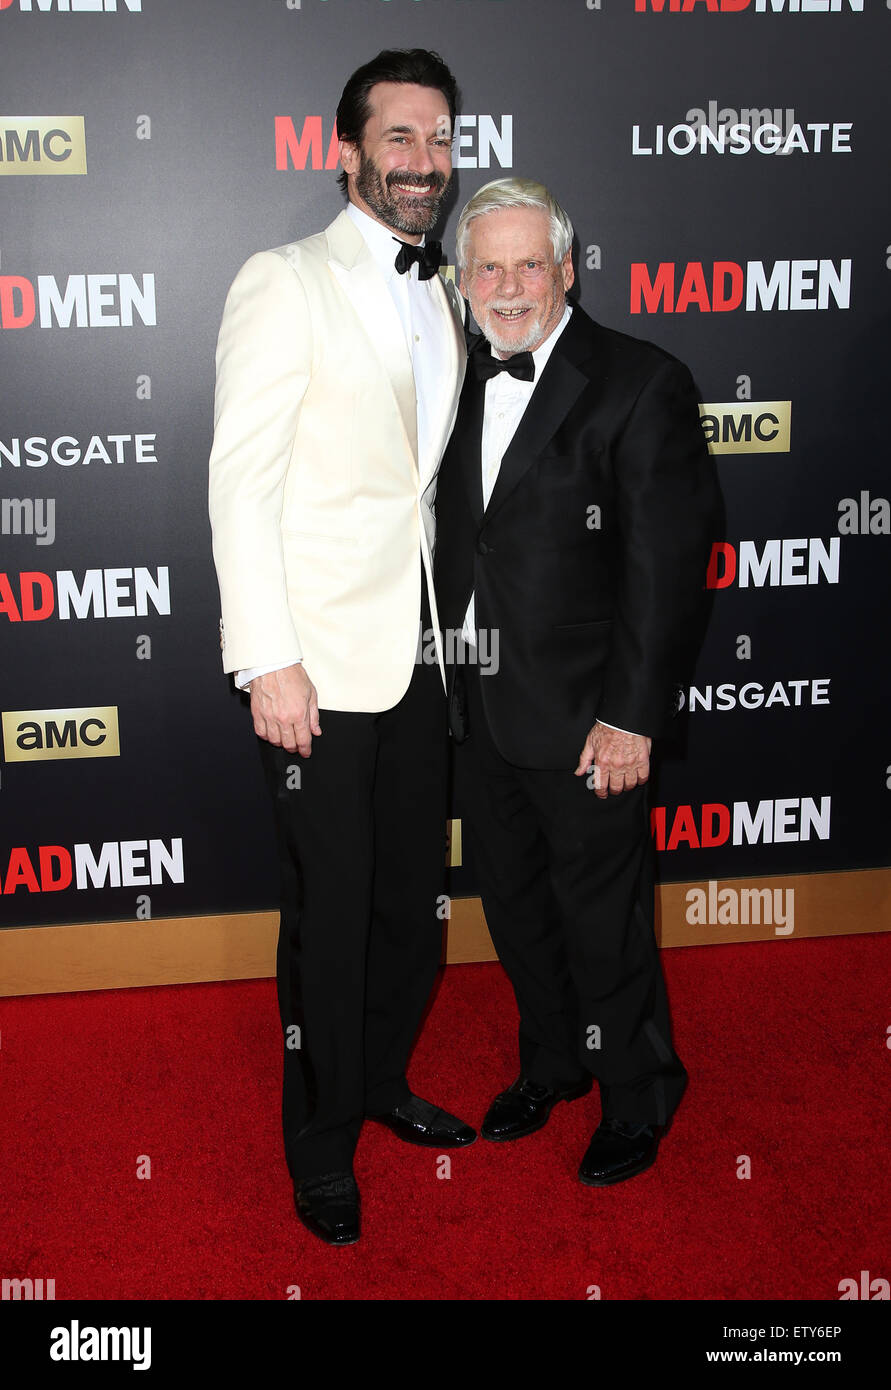 AMC Celebrates The Mad Men 7 Episodes Of 'Mad Men' With The Black & Red Ball  Featuring: Jon Hamm, Robert Morse Where: Los Angeles, California, United States When: 26 Mar 2015 C Stock Photo